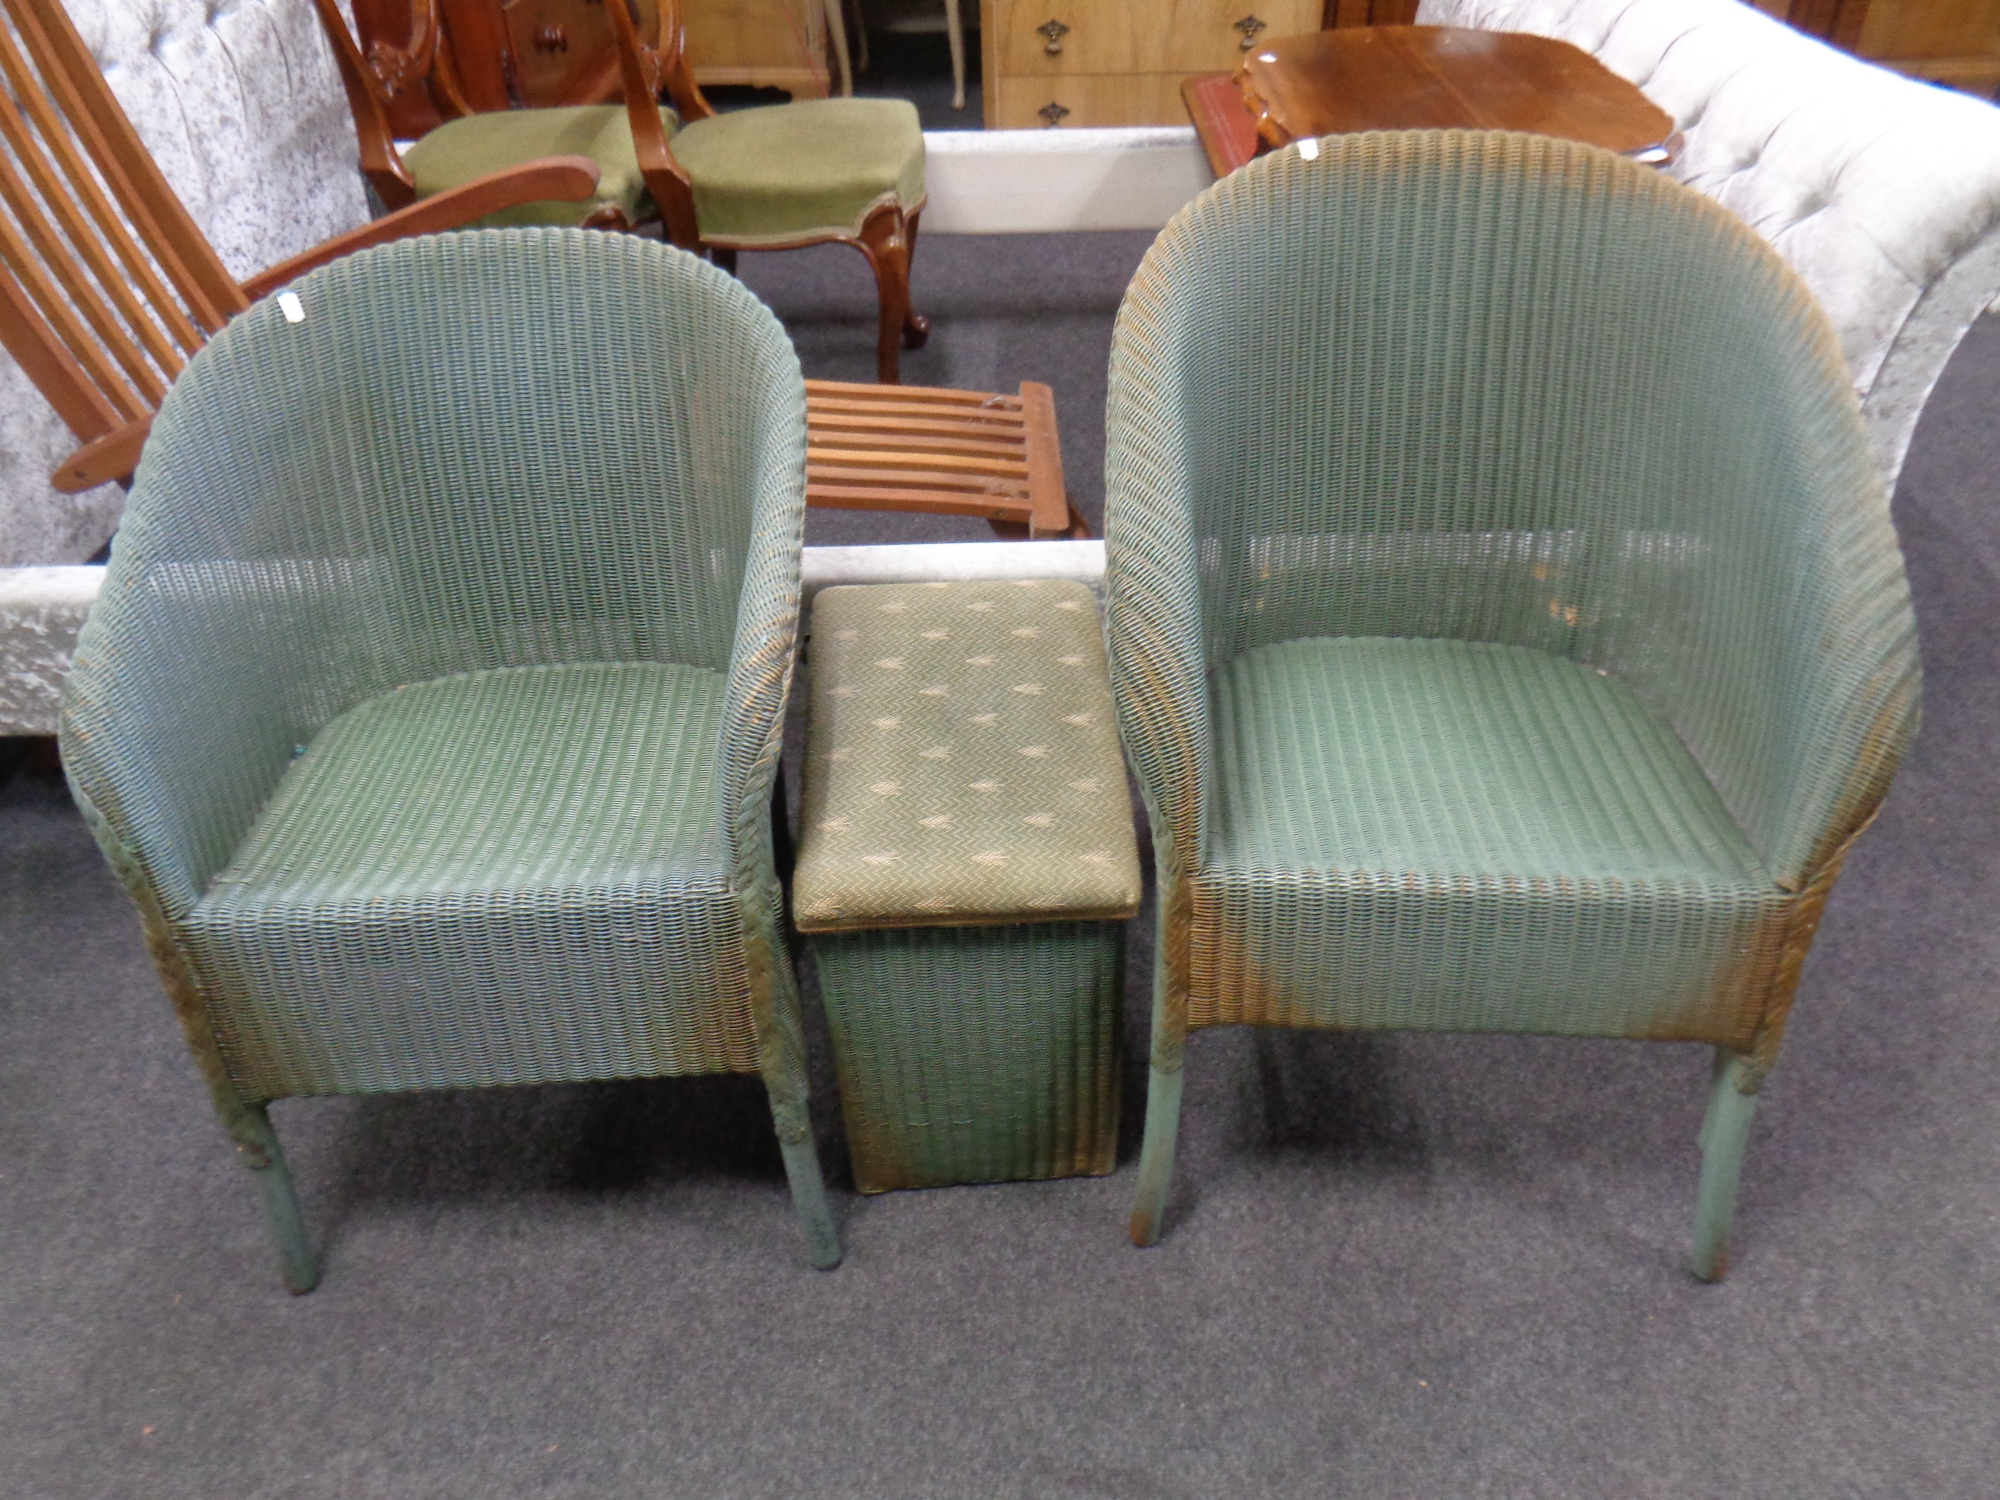 Two green loom chairs together with a storage box